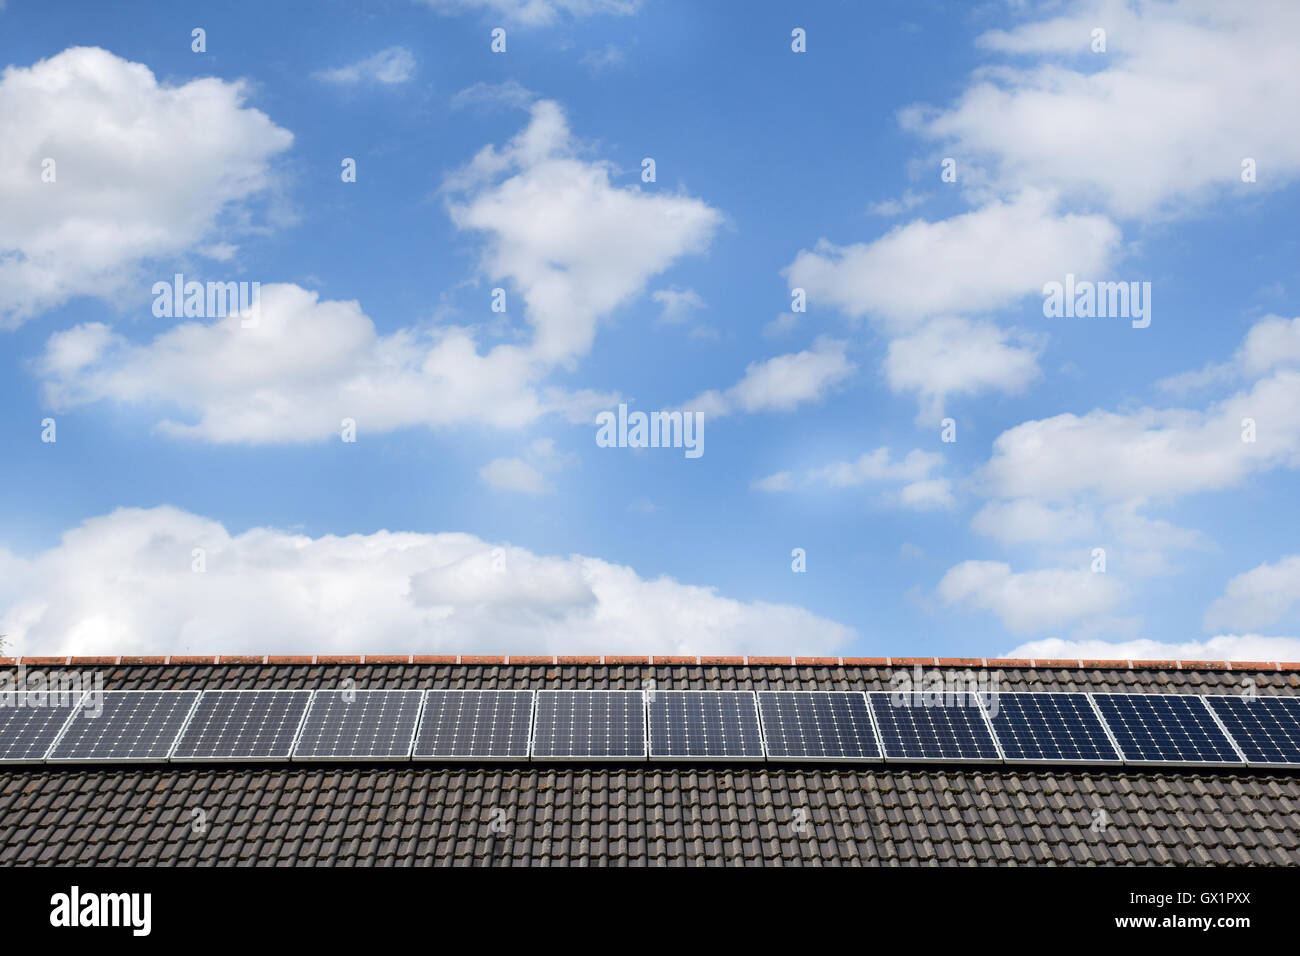 Row of solar pv panels on a rooftop on a sunny day Stock Photo